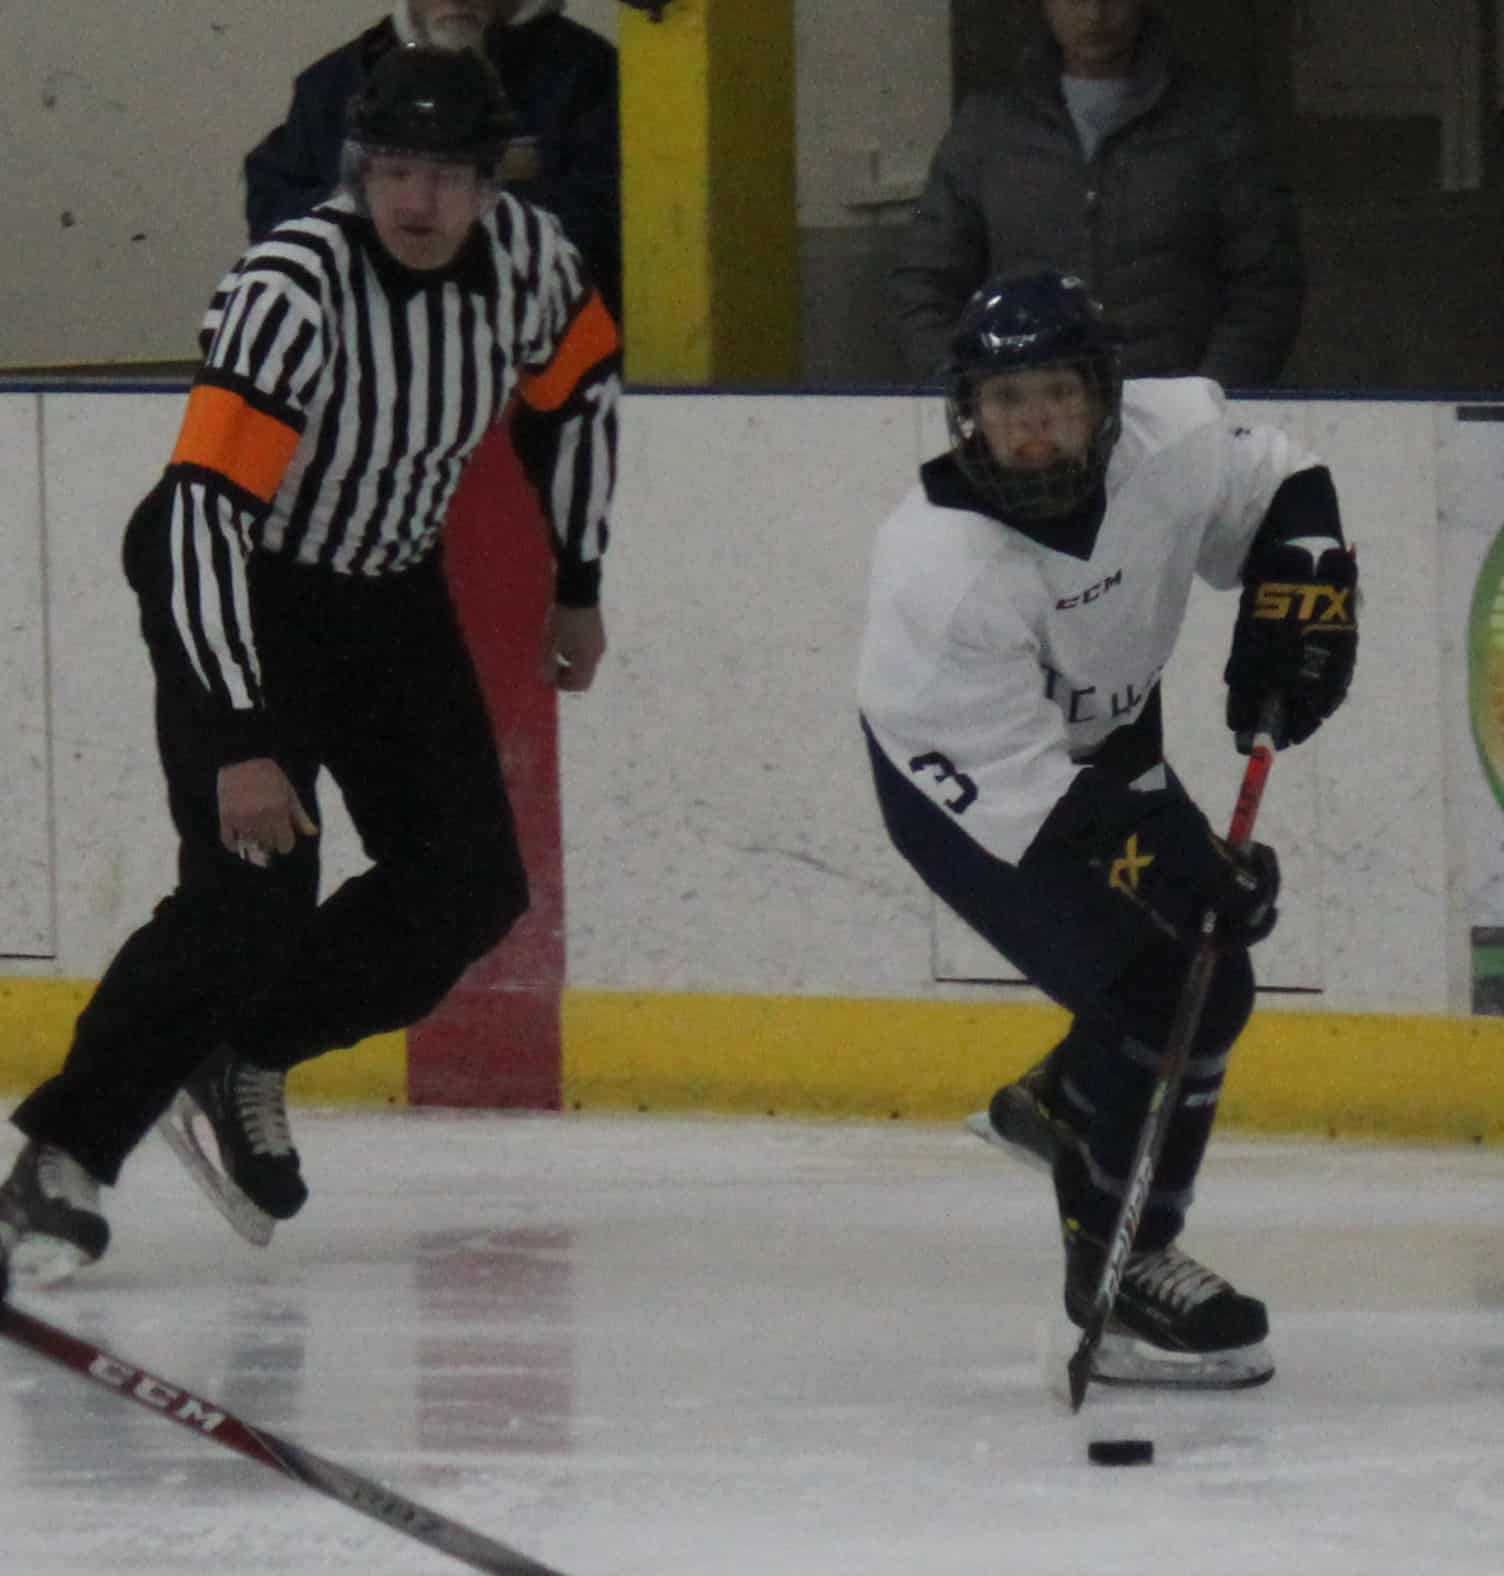 After bugaboo in Baraboo, Hatchet hockey gets home stretch with Bluejacks Thursday